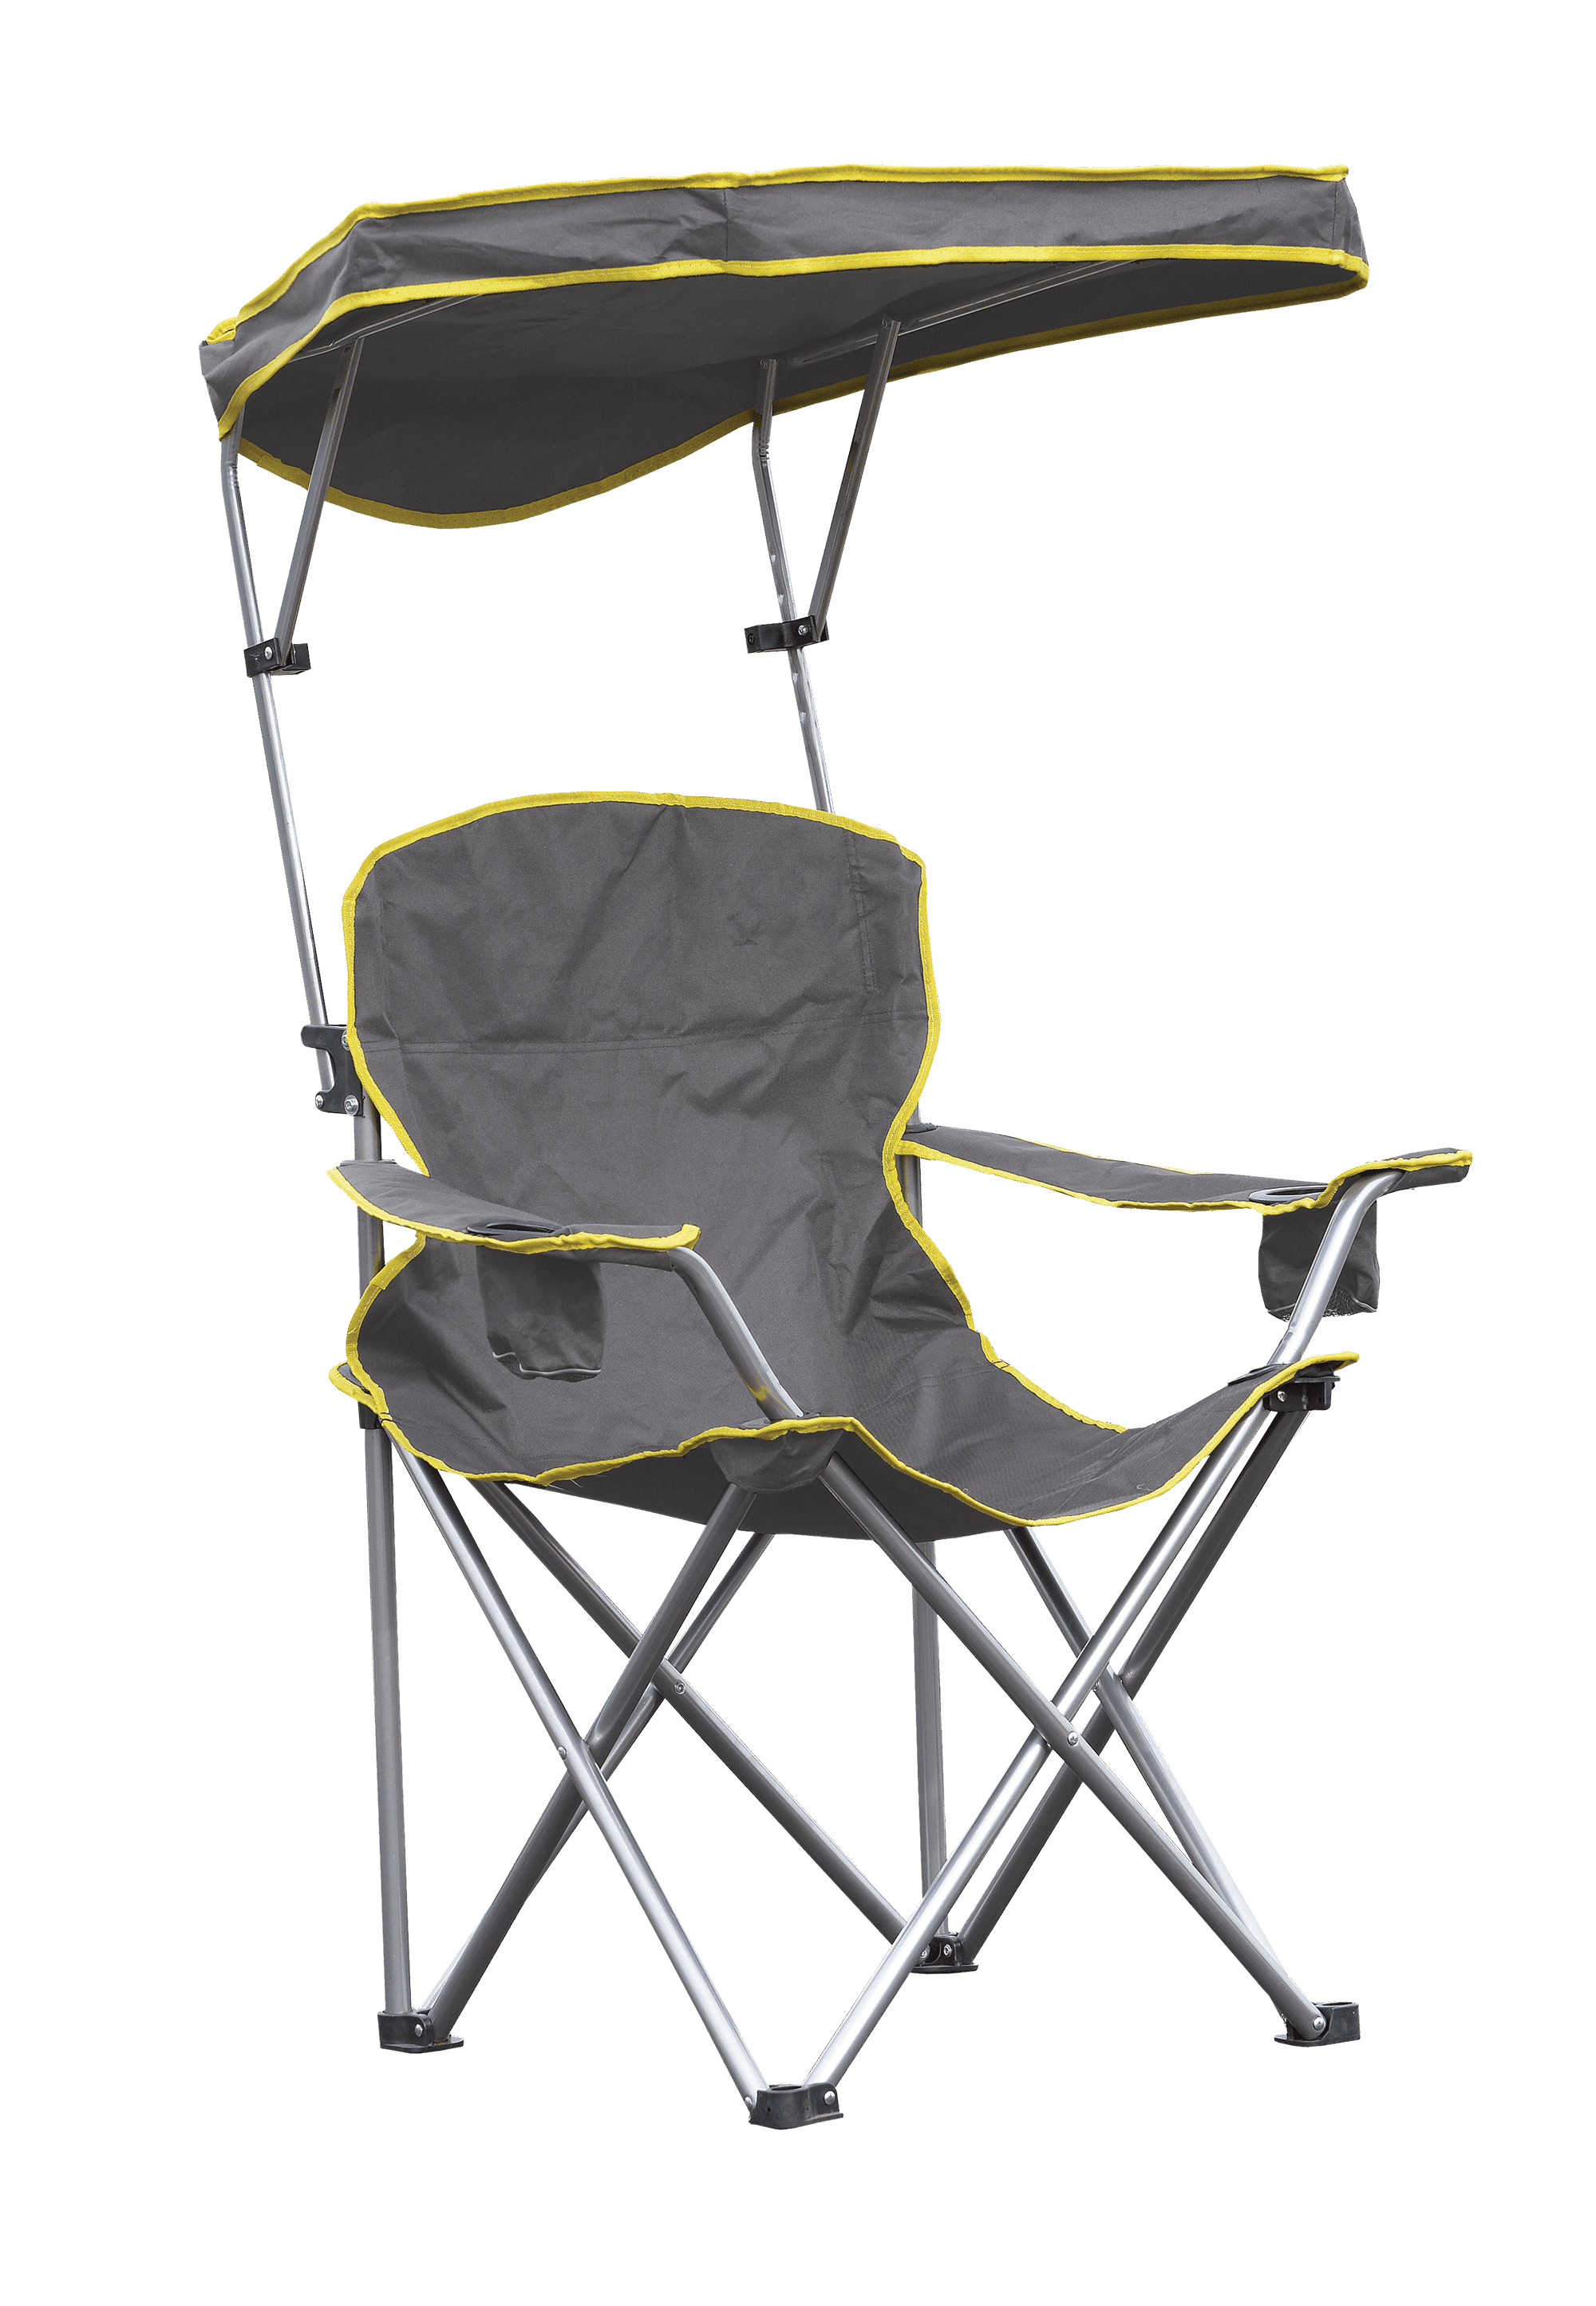 Heavy Duty Max Shade Folding Chair, Grey, Lawn Chairs, Lounge Chairs